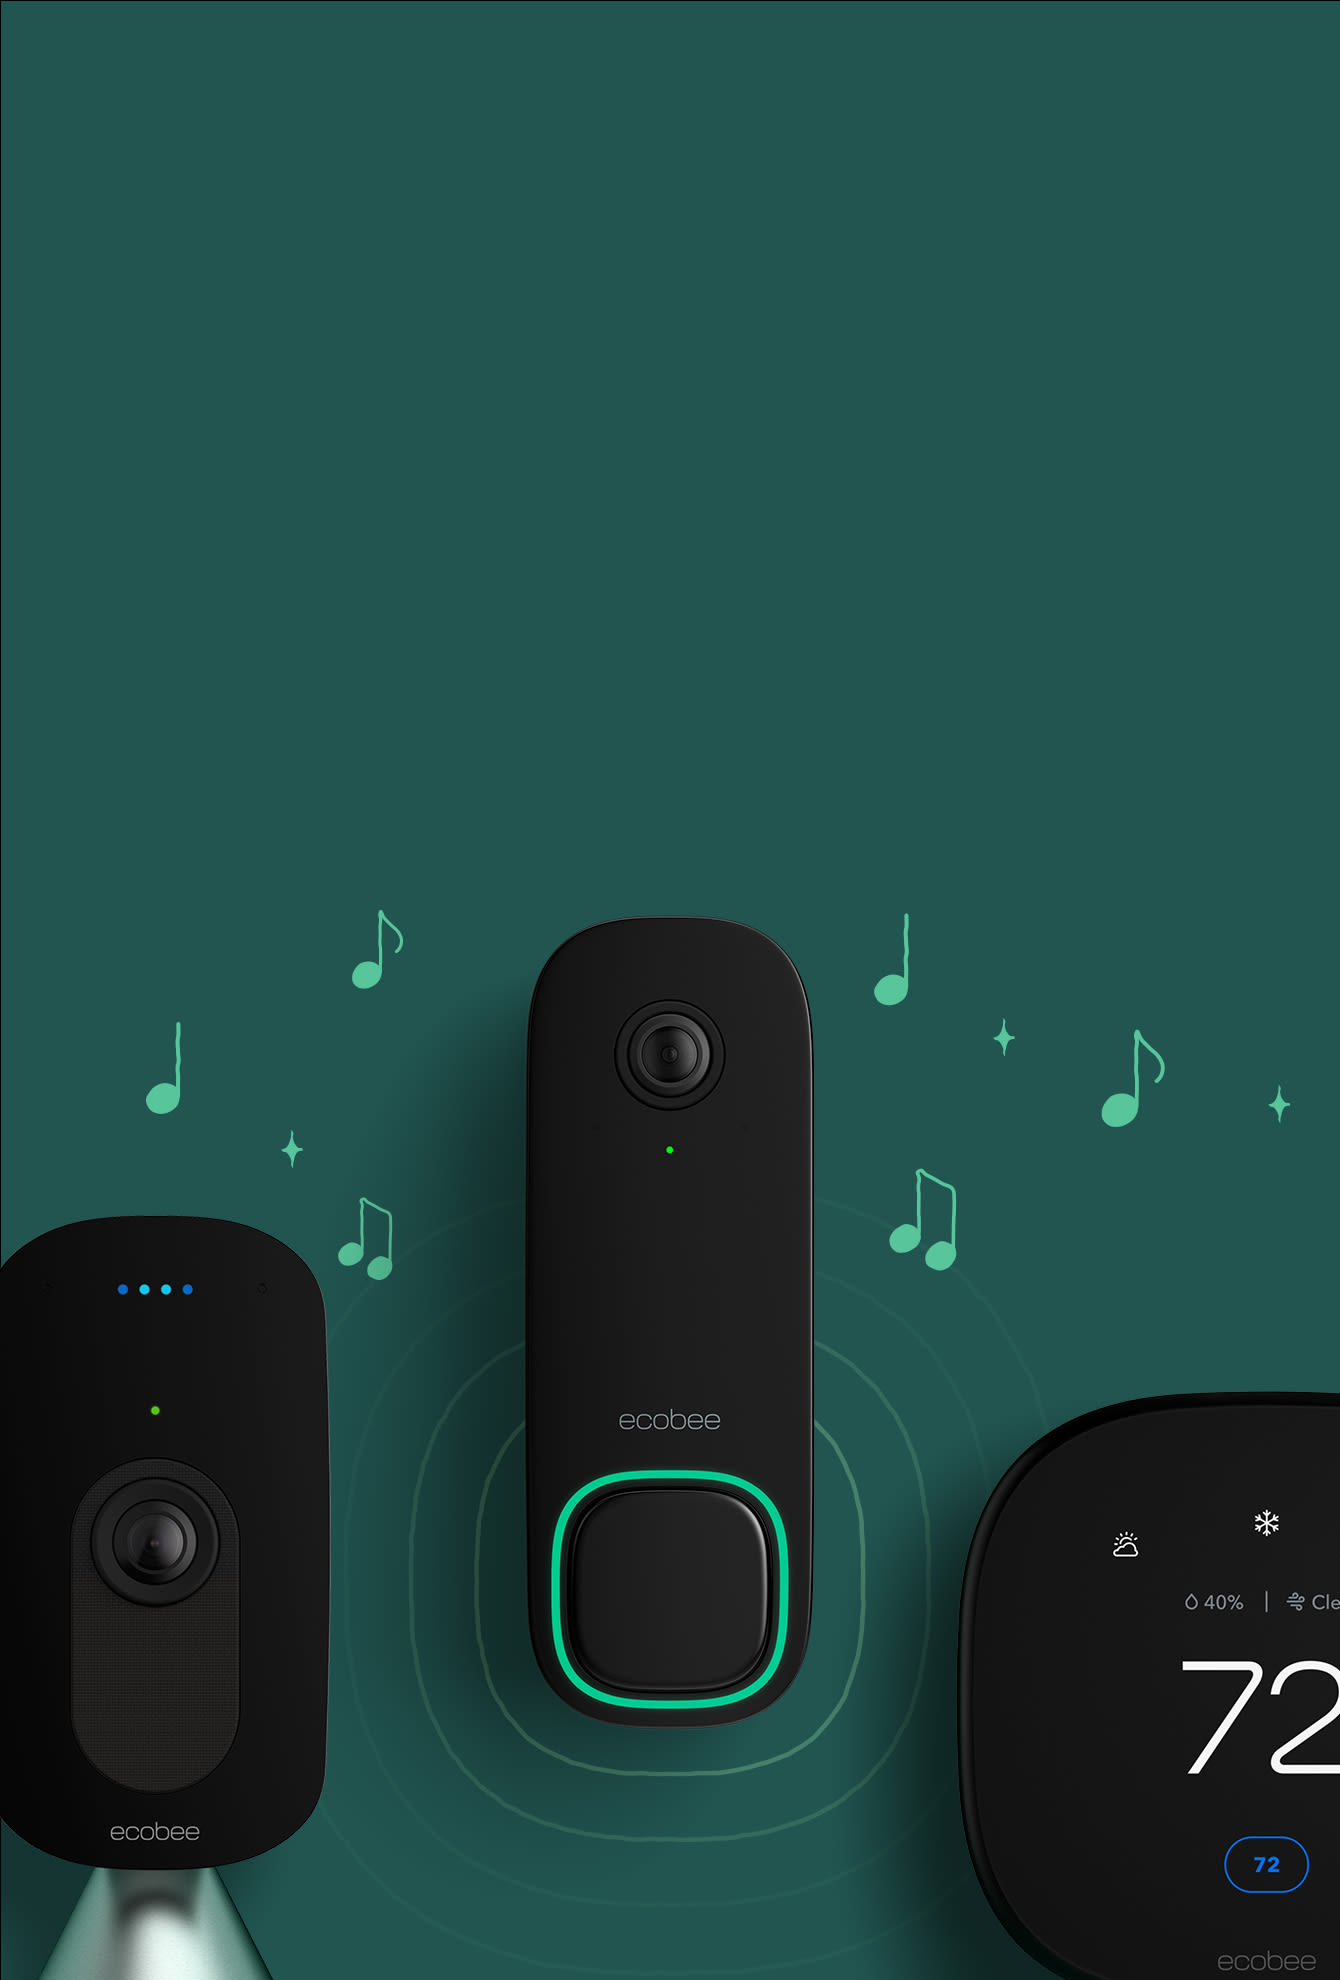 ecobee smart camera doorbell shown with music notes around it, surrounded by ecobee smartcamera and thermostat